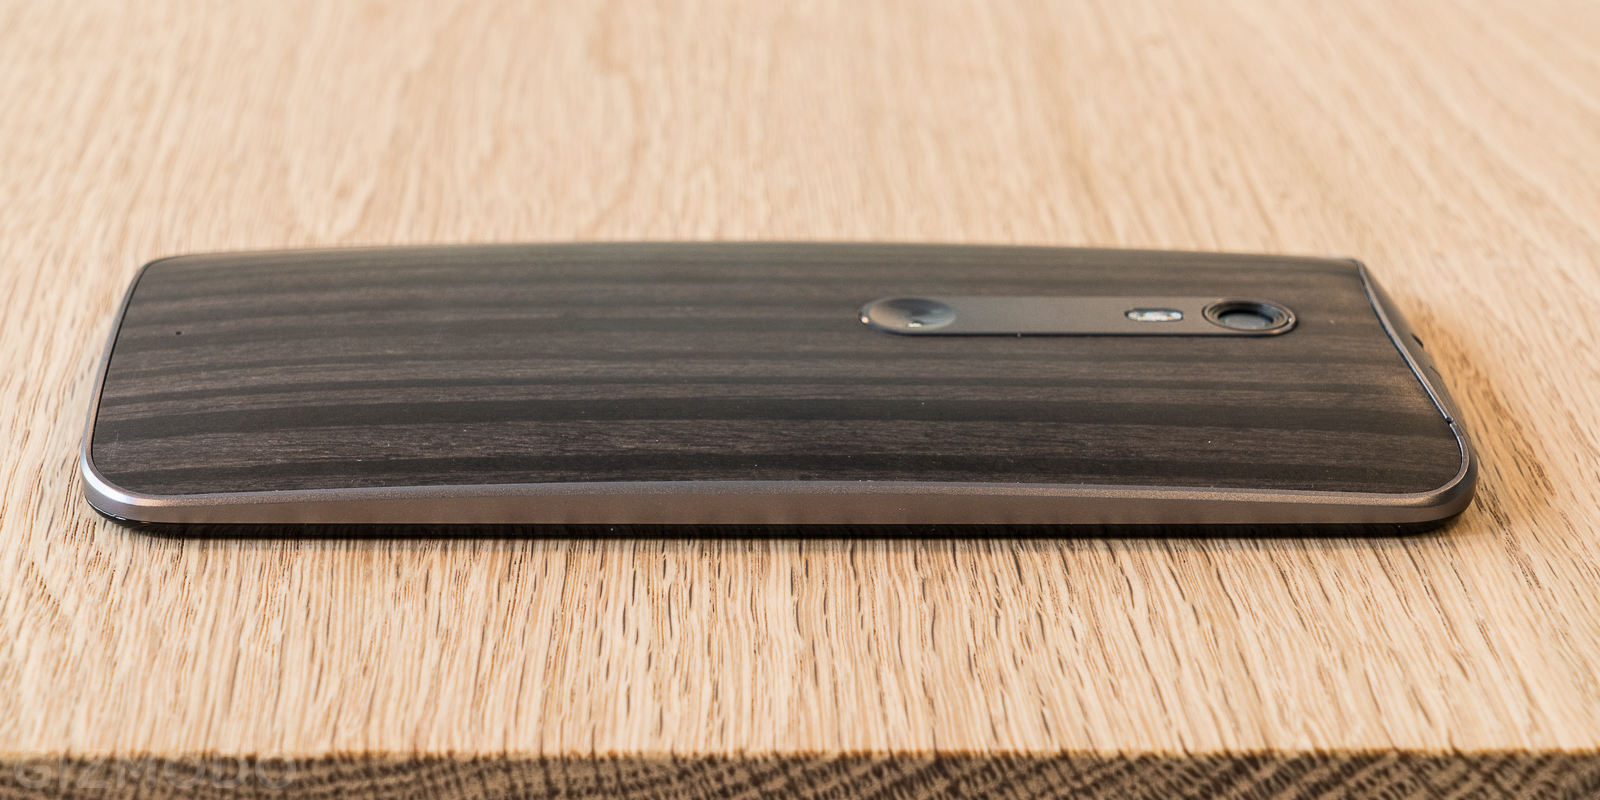 Moto X Style Review: This Phone Does Android Better Than Google